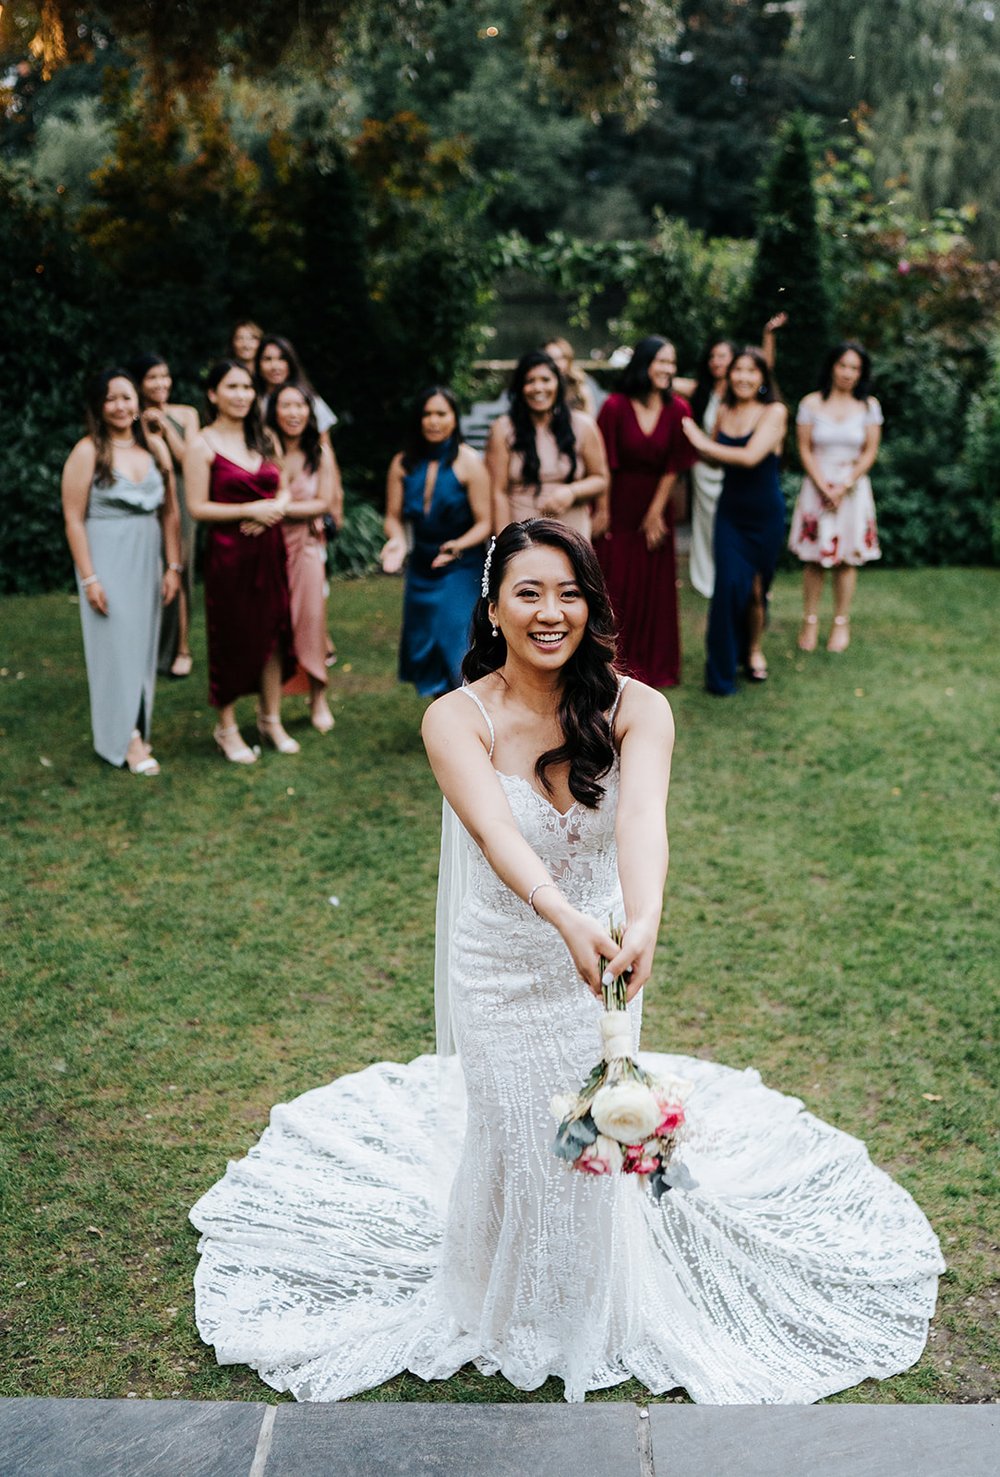 Bride throws bouquet towards friends standing behind her ready to catch it 